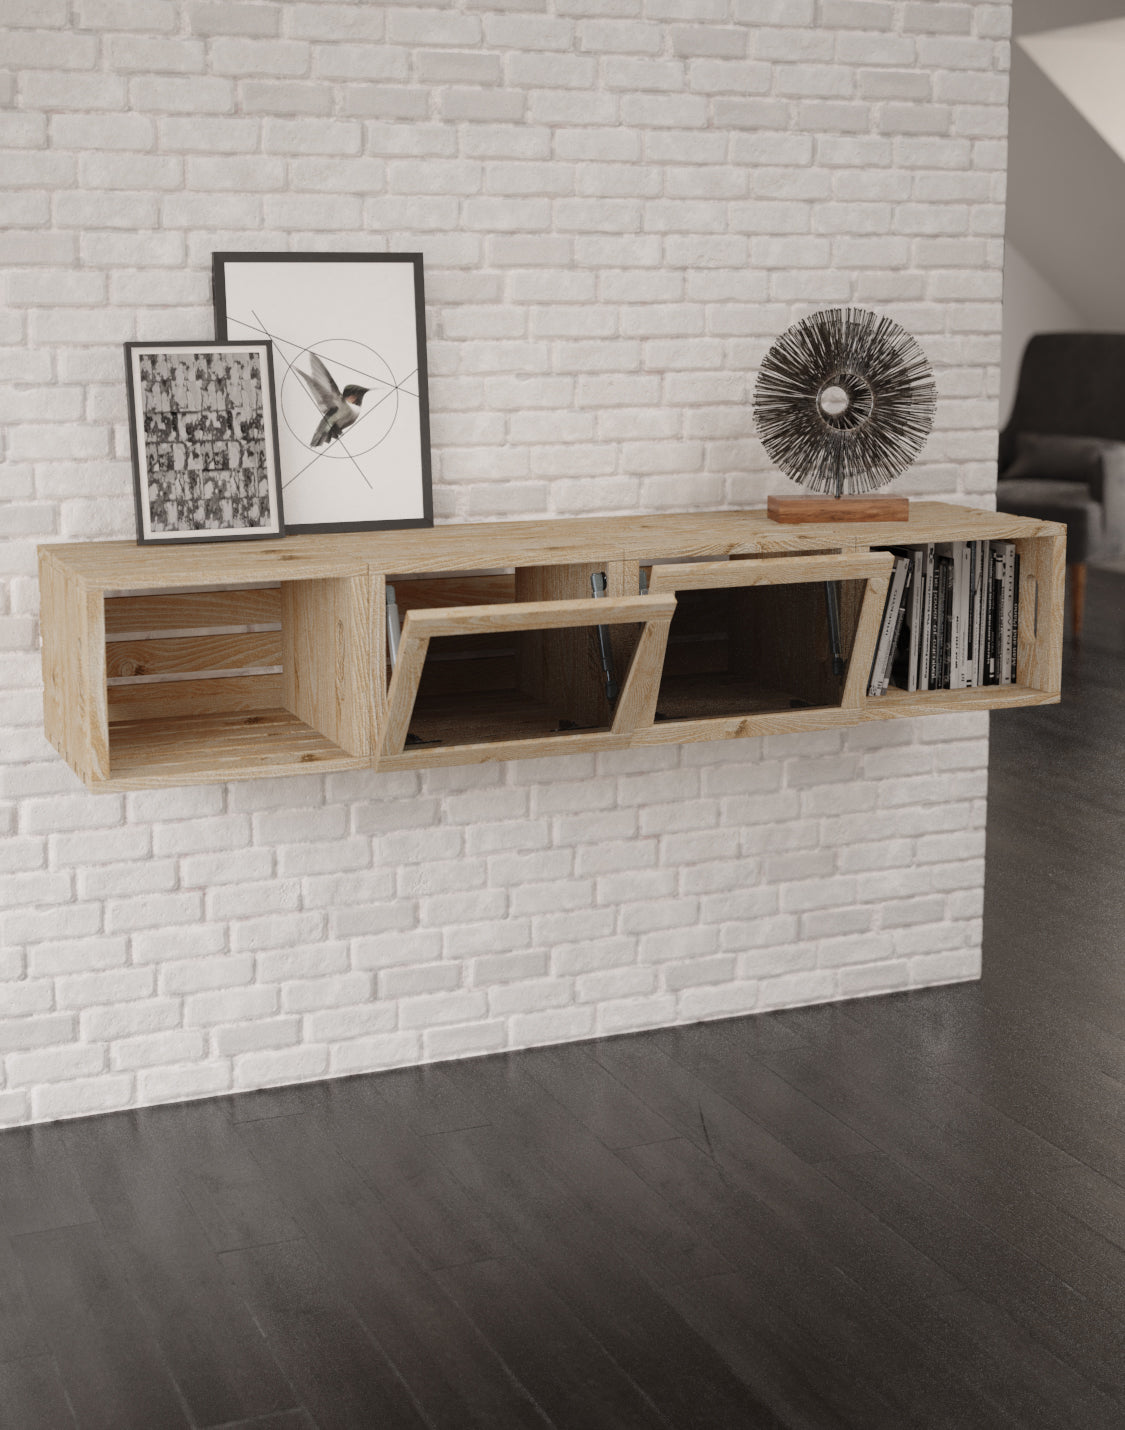 Monet Console Modular And real wood furniture product